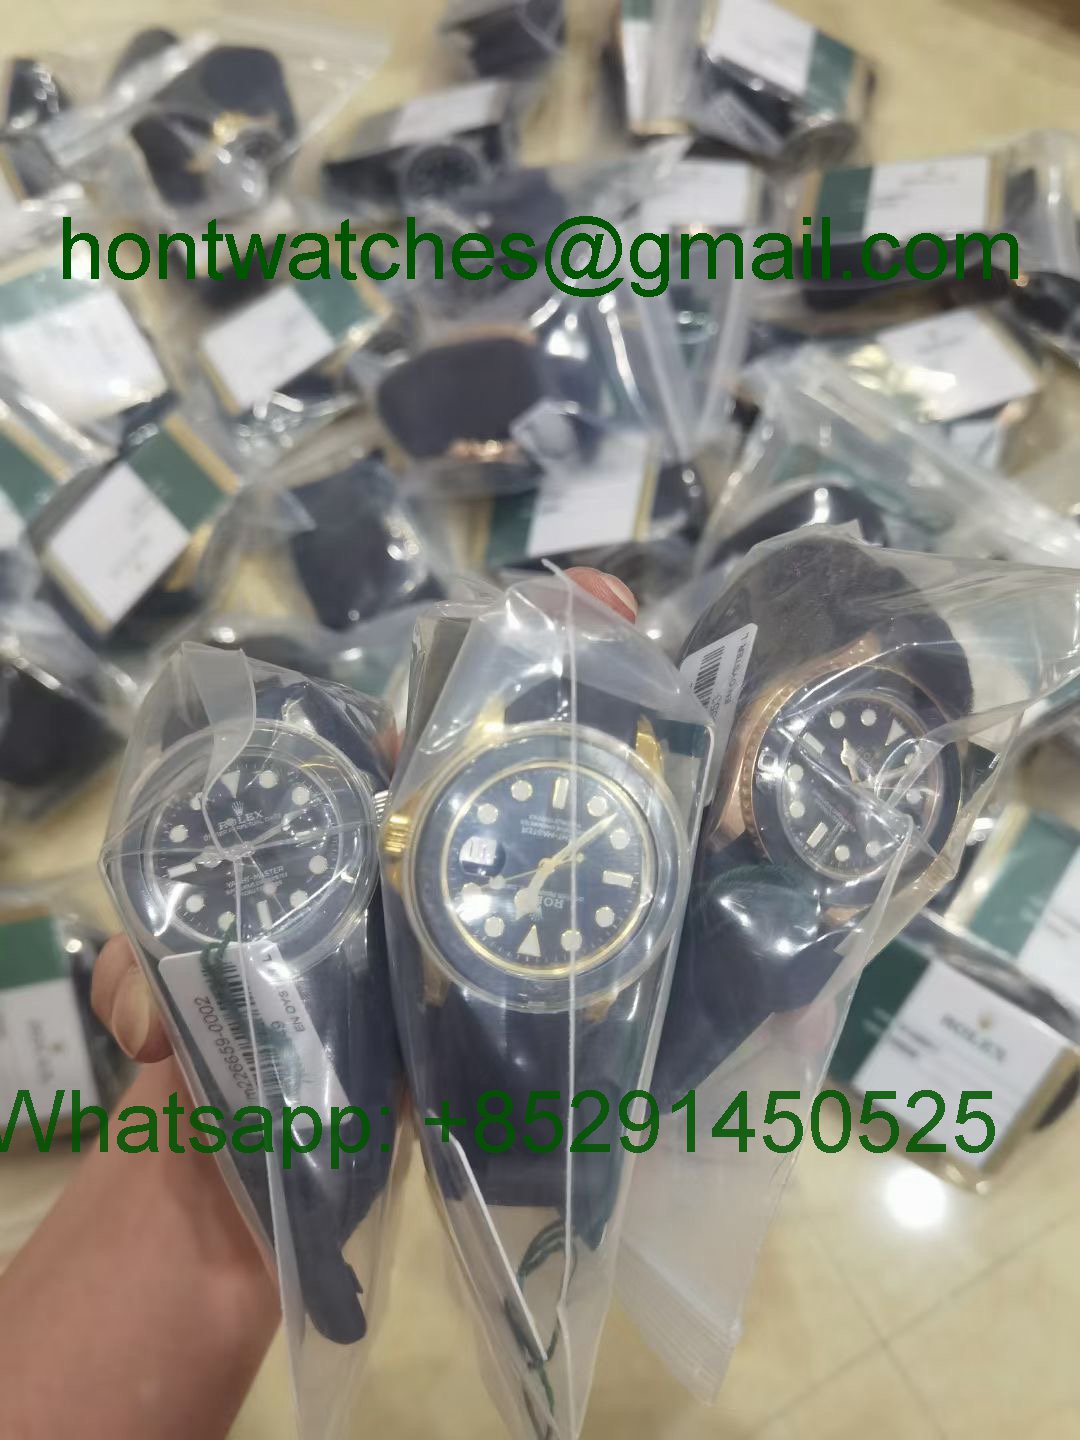 Replica Watch Wholesale Hontwatch Replica Rolex Yachtmaster 42mm Yellow Gold 226658 VSF